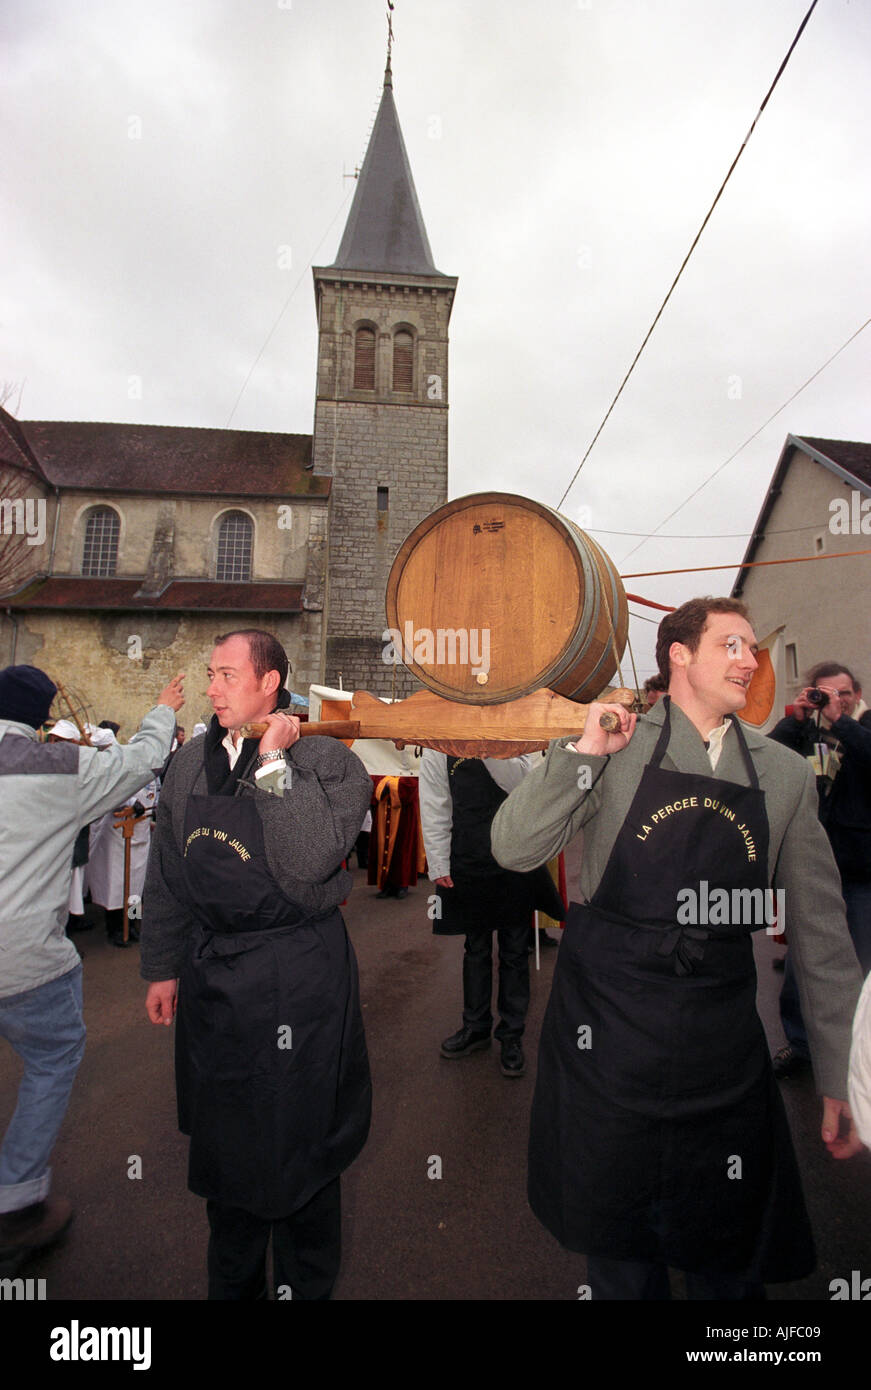 The Percee du Vin Jaune or piercing of the barrel Festival in the French Comte region of France Stock Photo